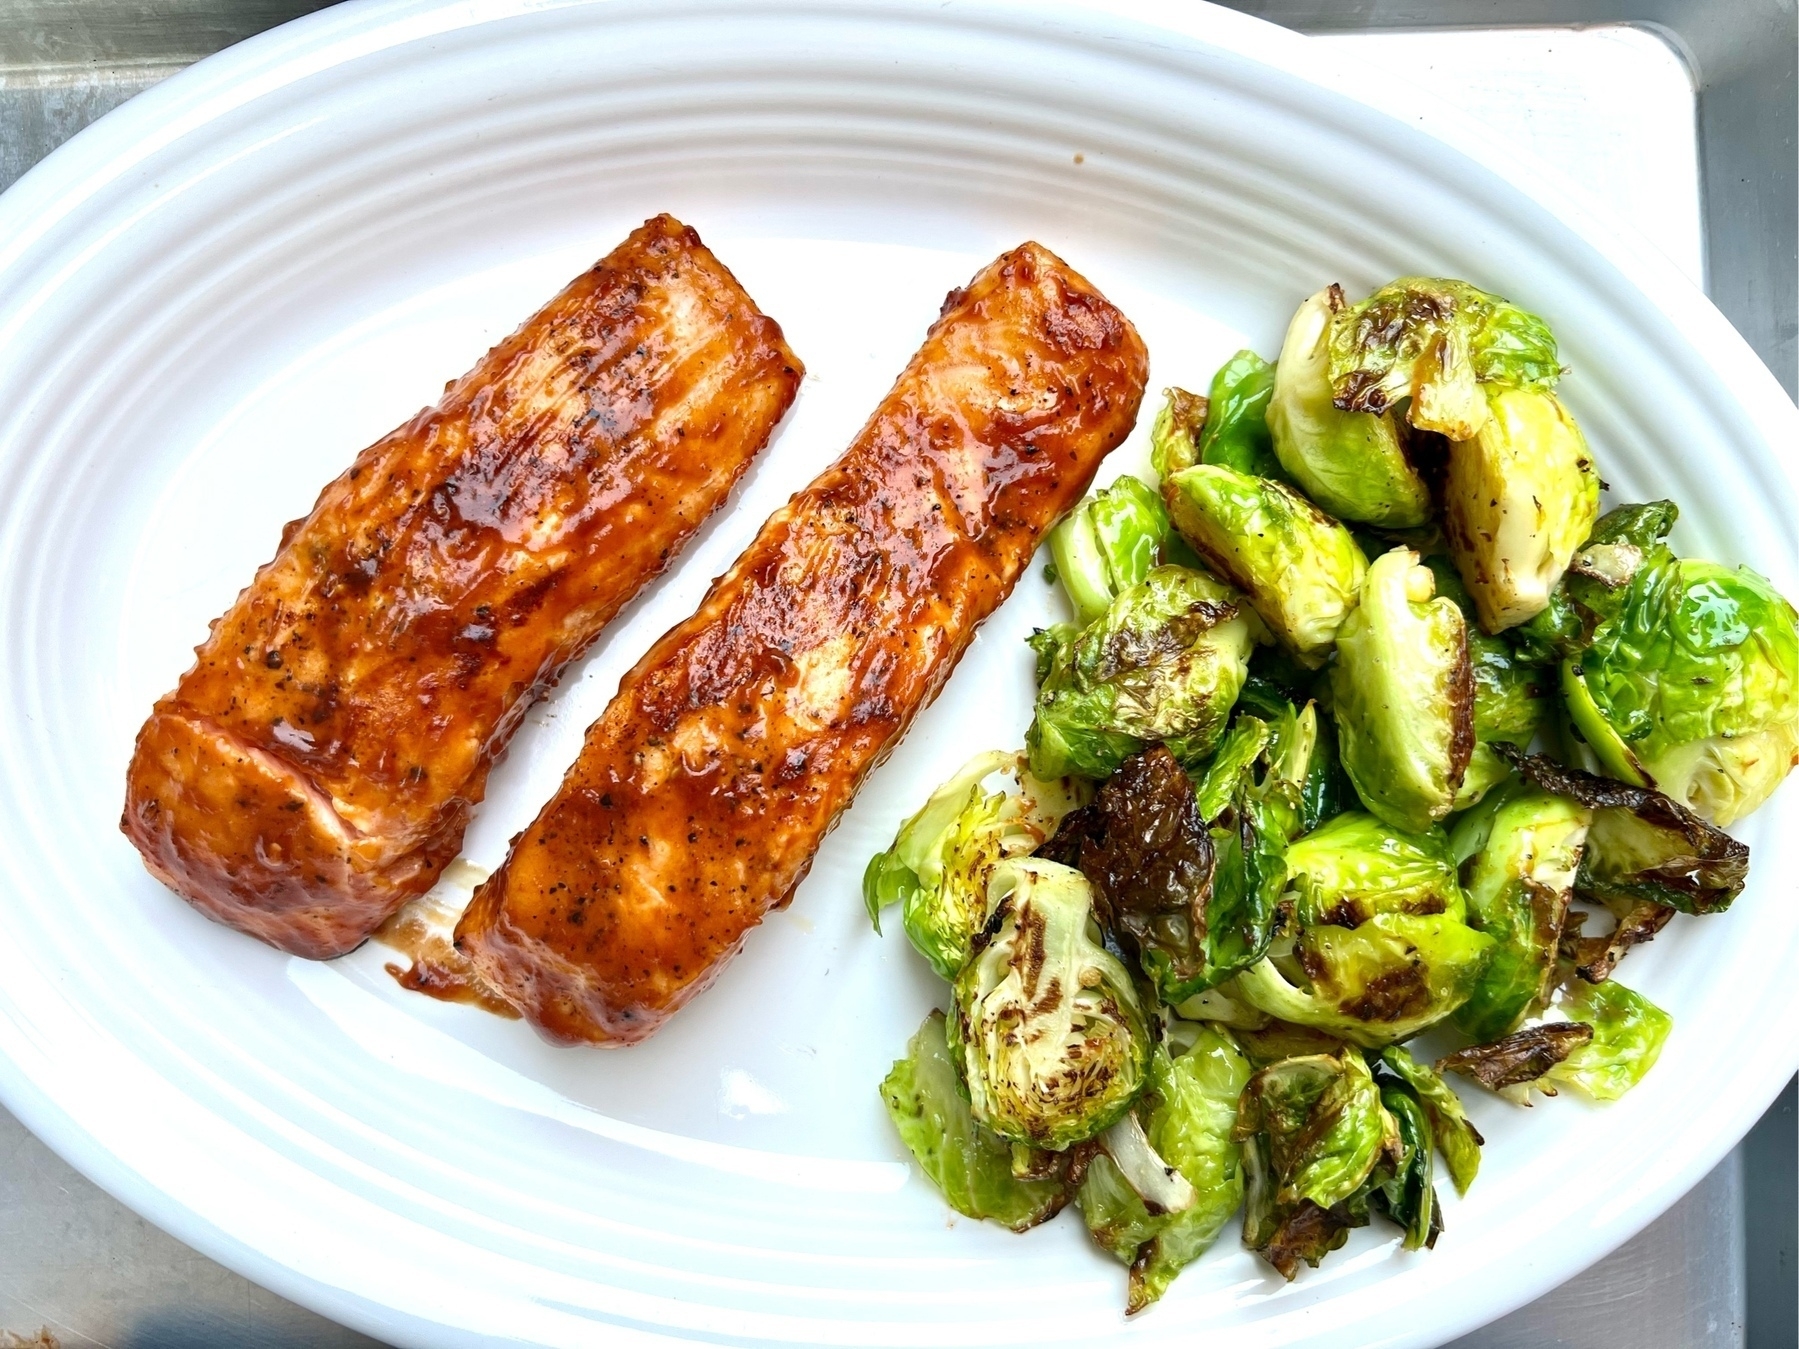 bbq grilled salmon filets kn a white oval plate. they are accompanied by grilled brussel sprouts. 